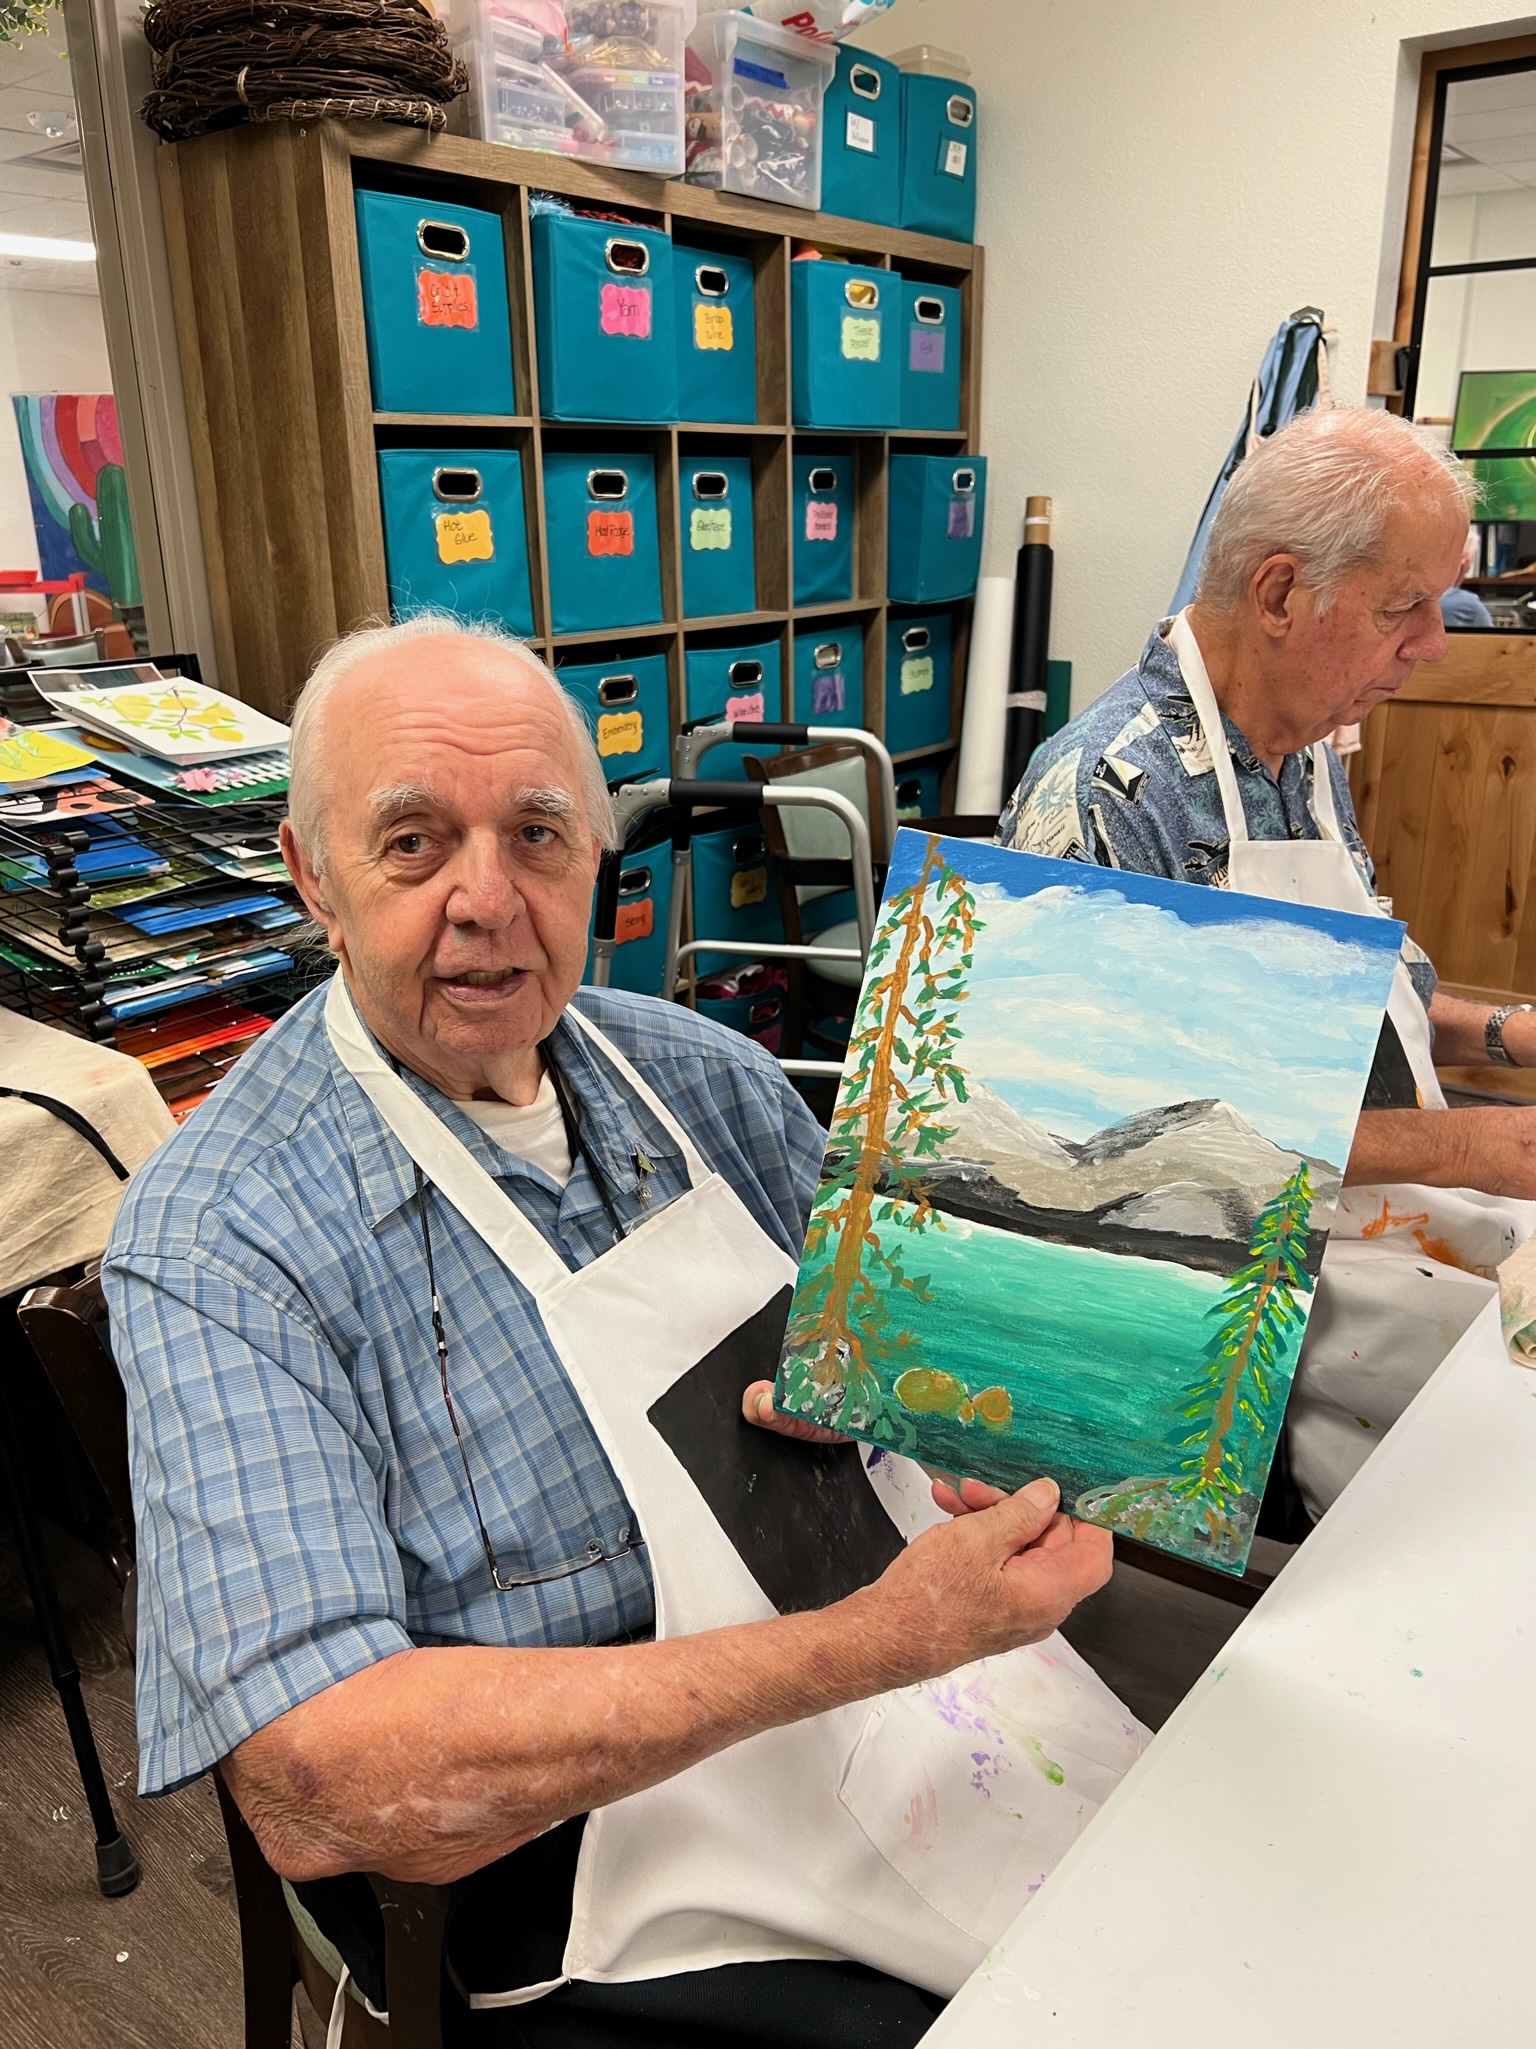 seniors with dementia channel the artist within at Oakwood Creative Care Adult Day Clubs